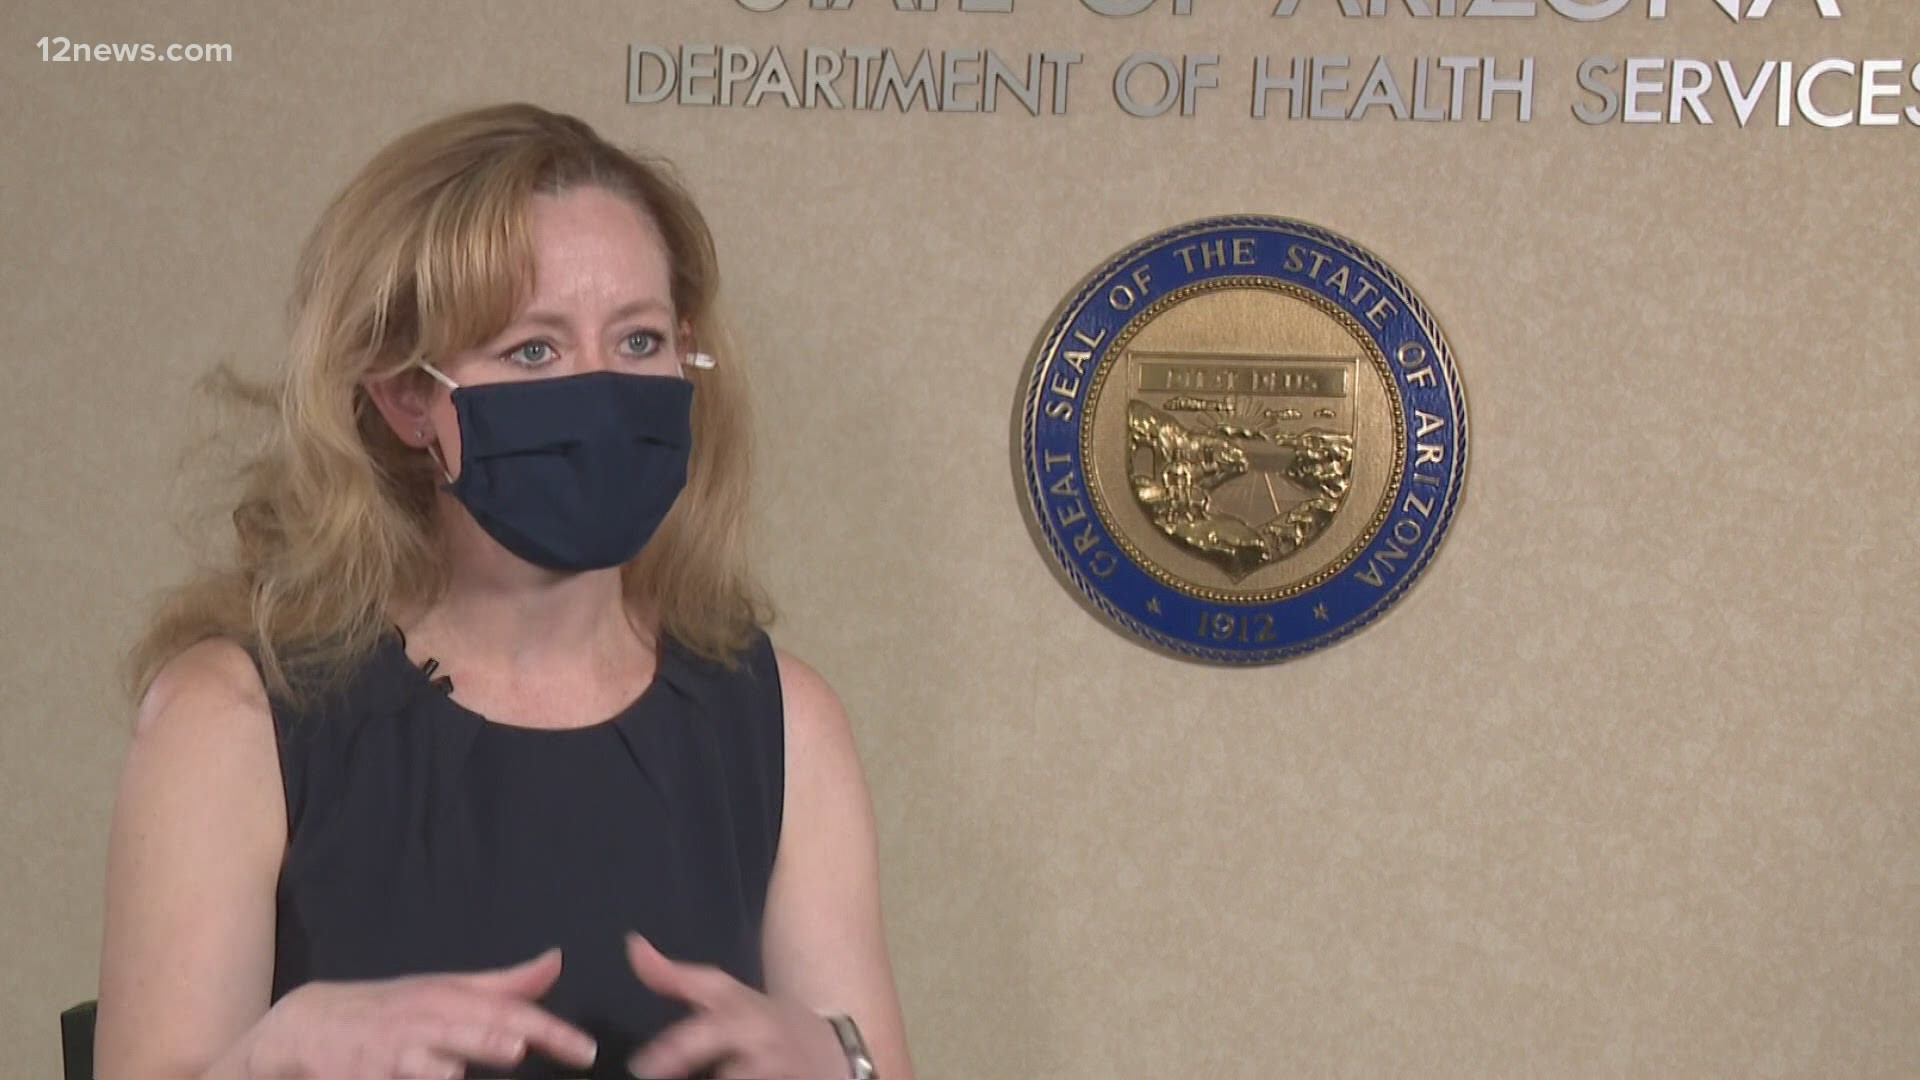 Dr. Cara Christ, Arizona's health director, gives state health experts a 'C' in anticipating the pandemic. For overall effort and response, she gave them an 'A'.